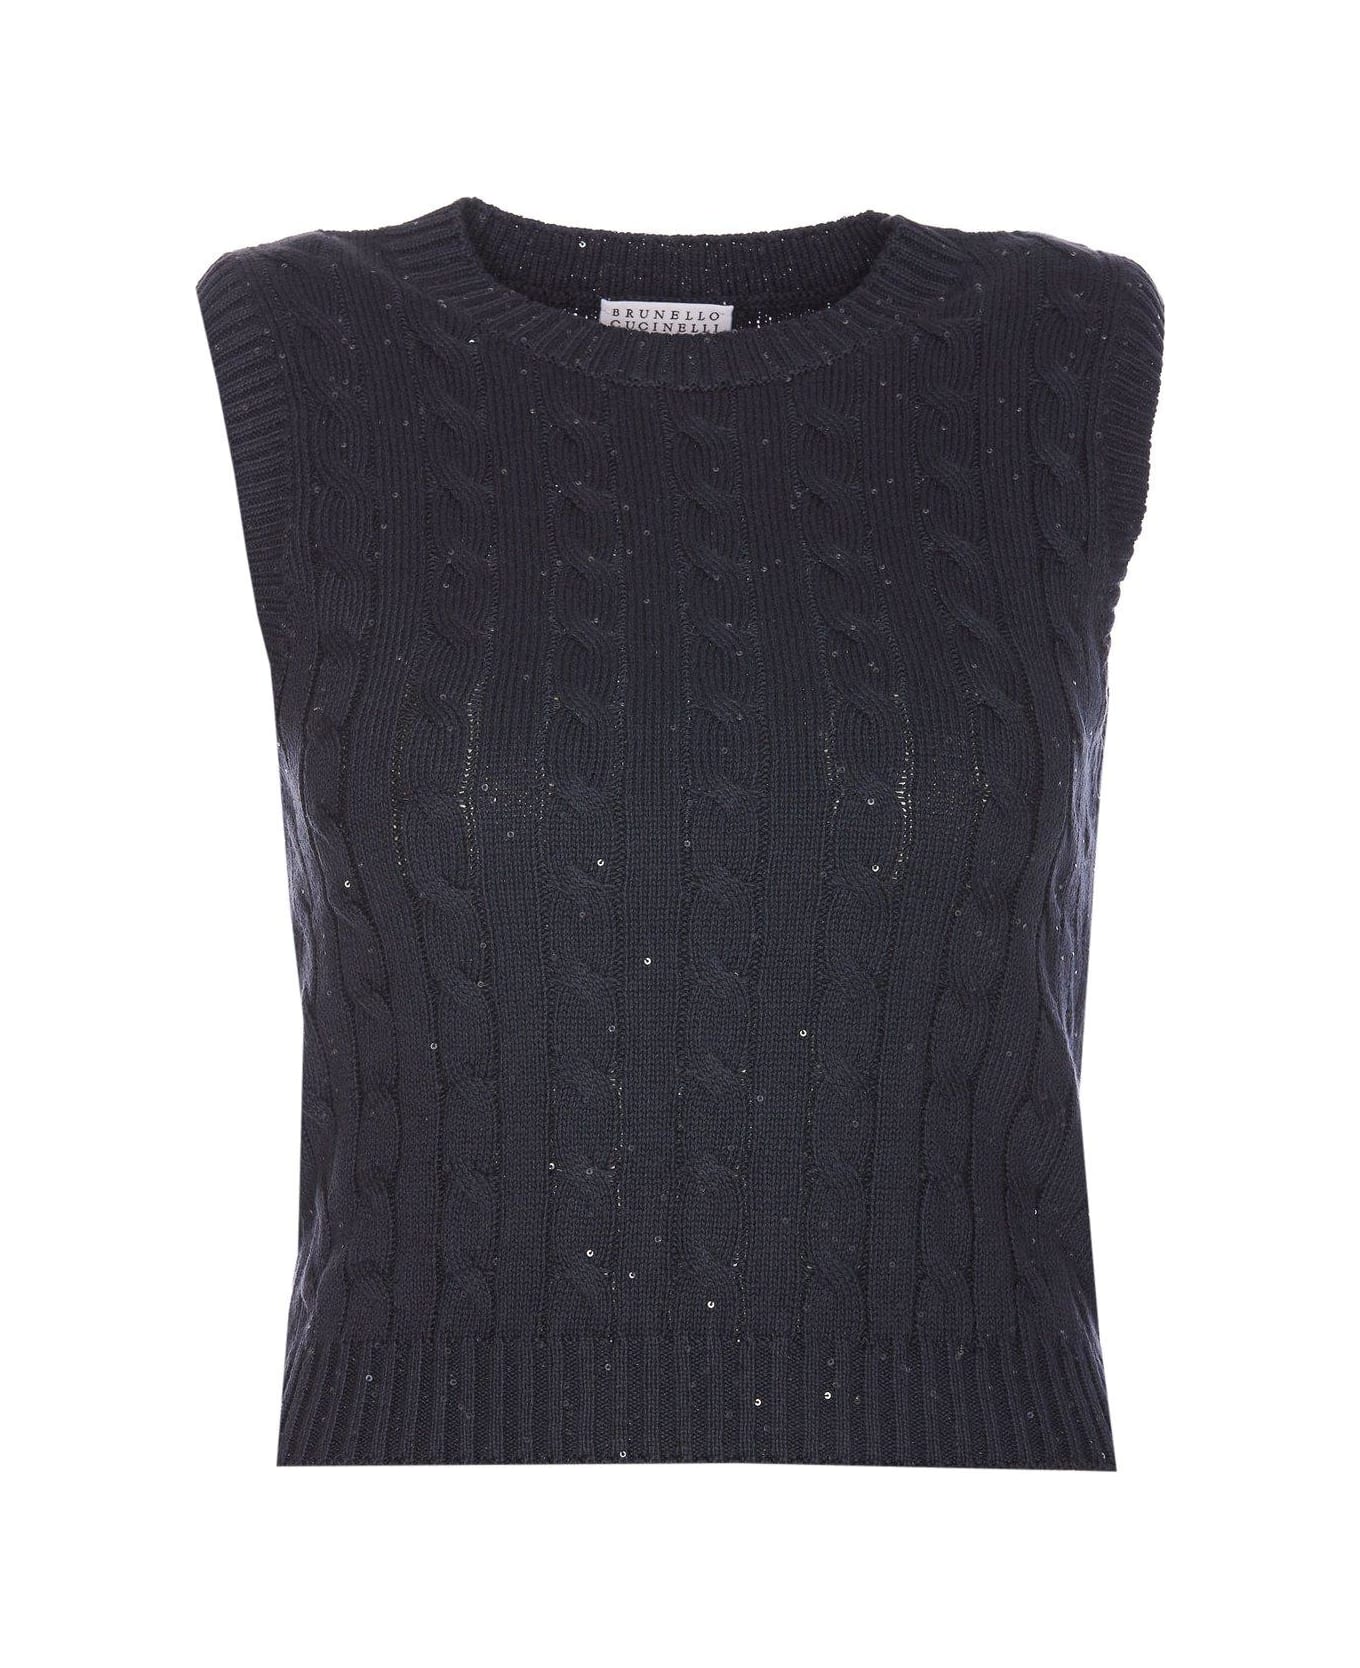 Brunello Cucinelli Sequin Embellished Cable-knitted Top - BLACK